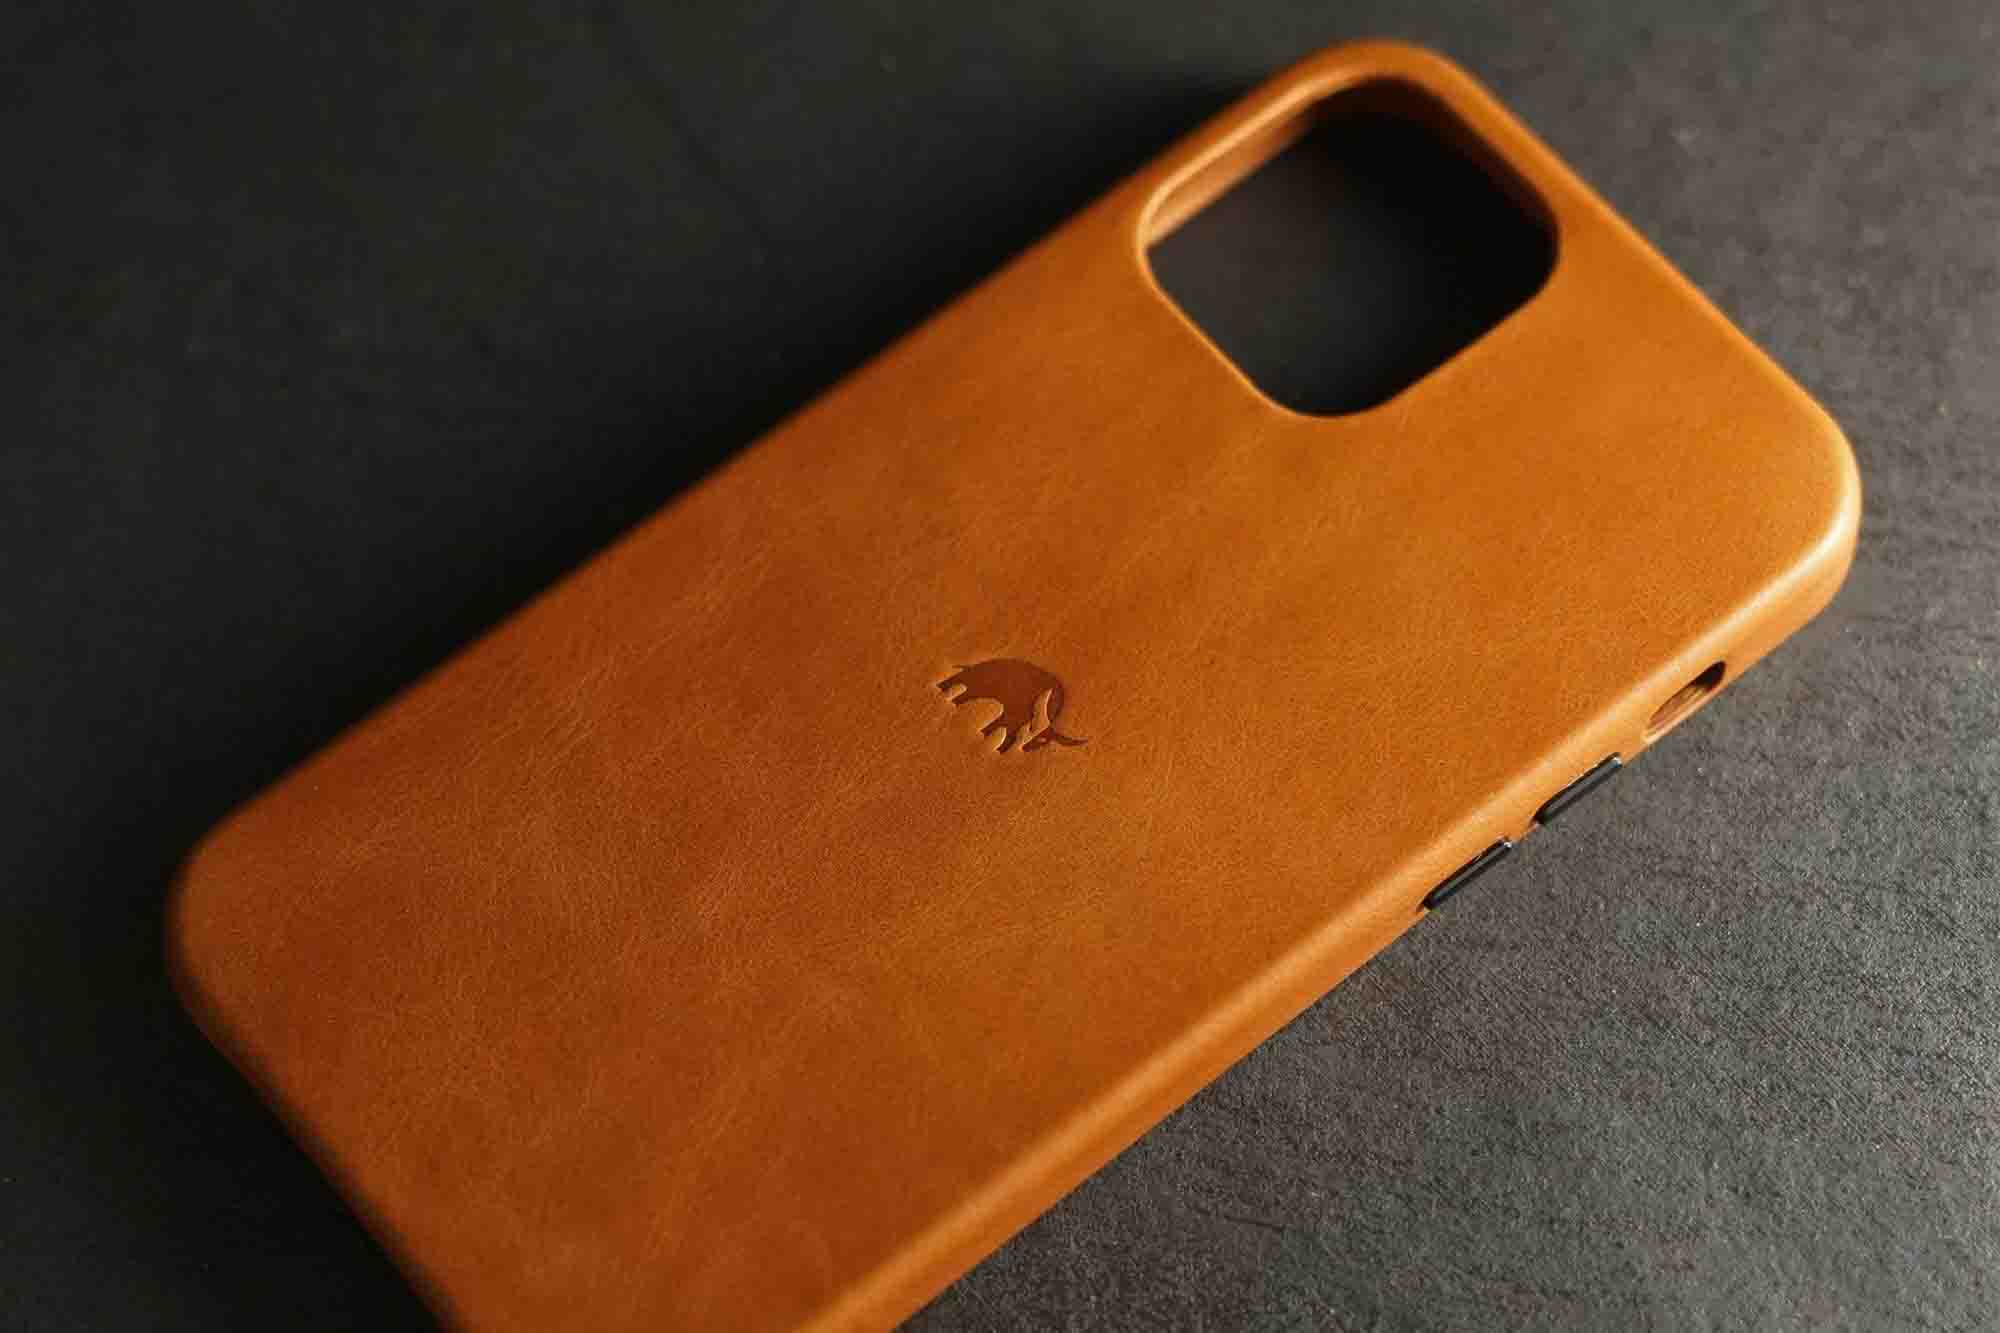  An empty tan leather iPhone 12 case from Bullstrap